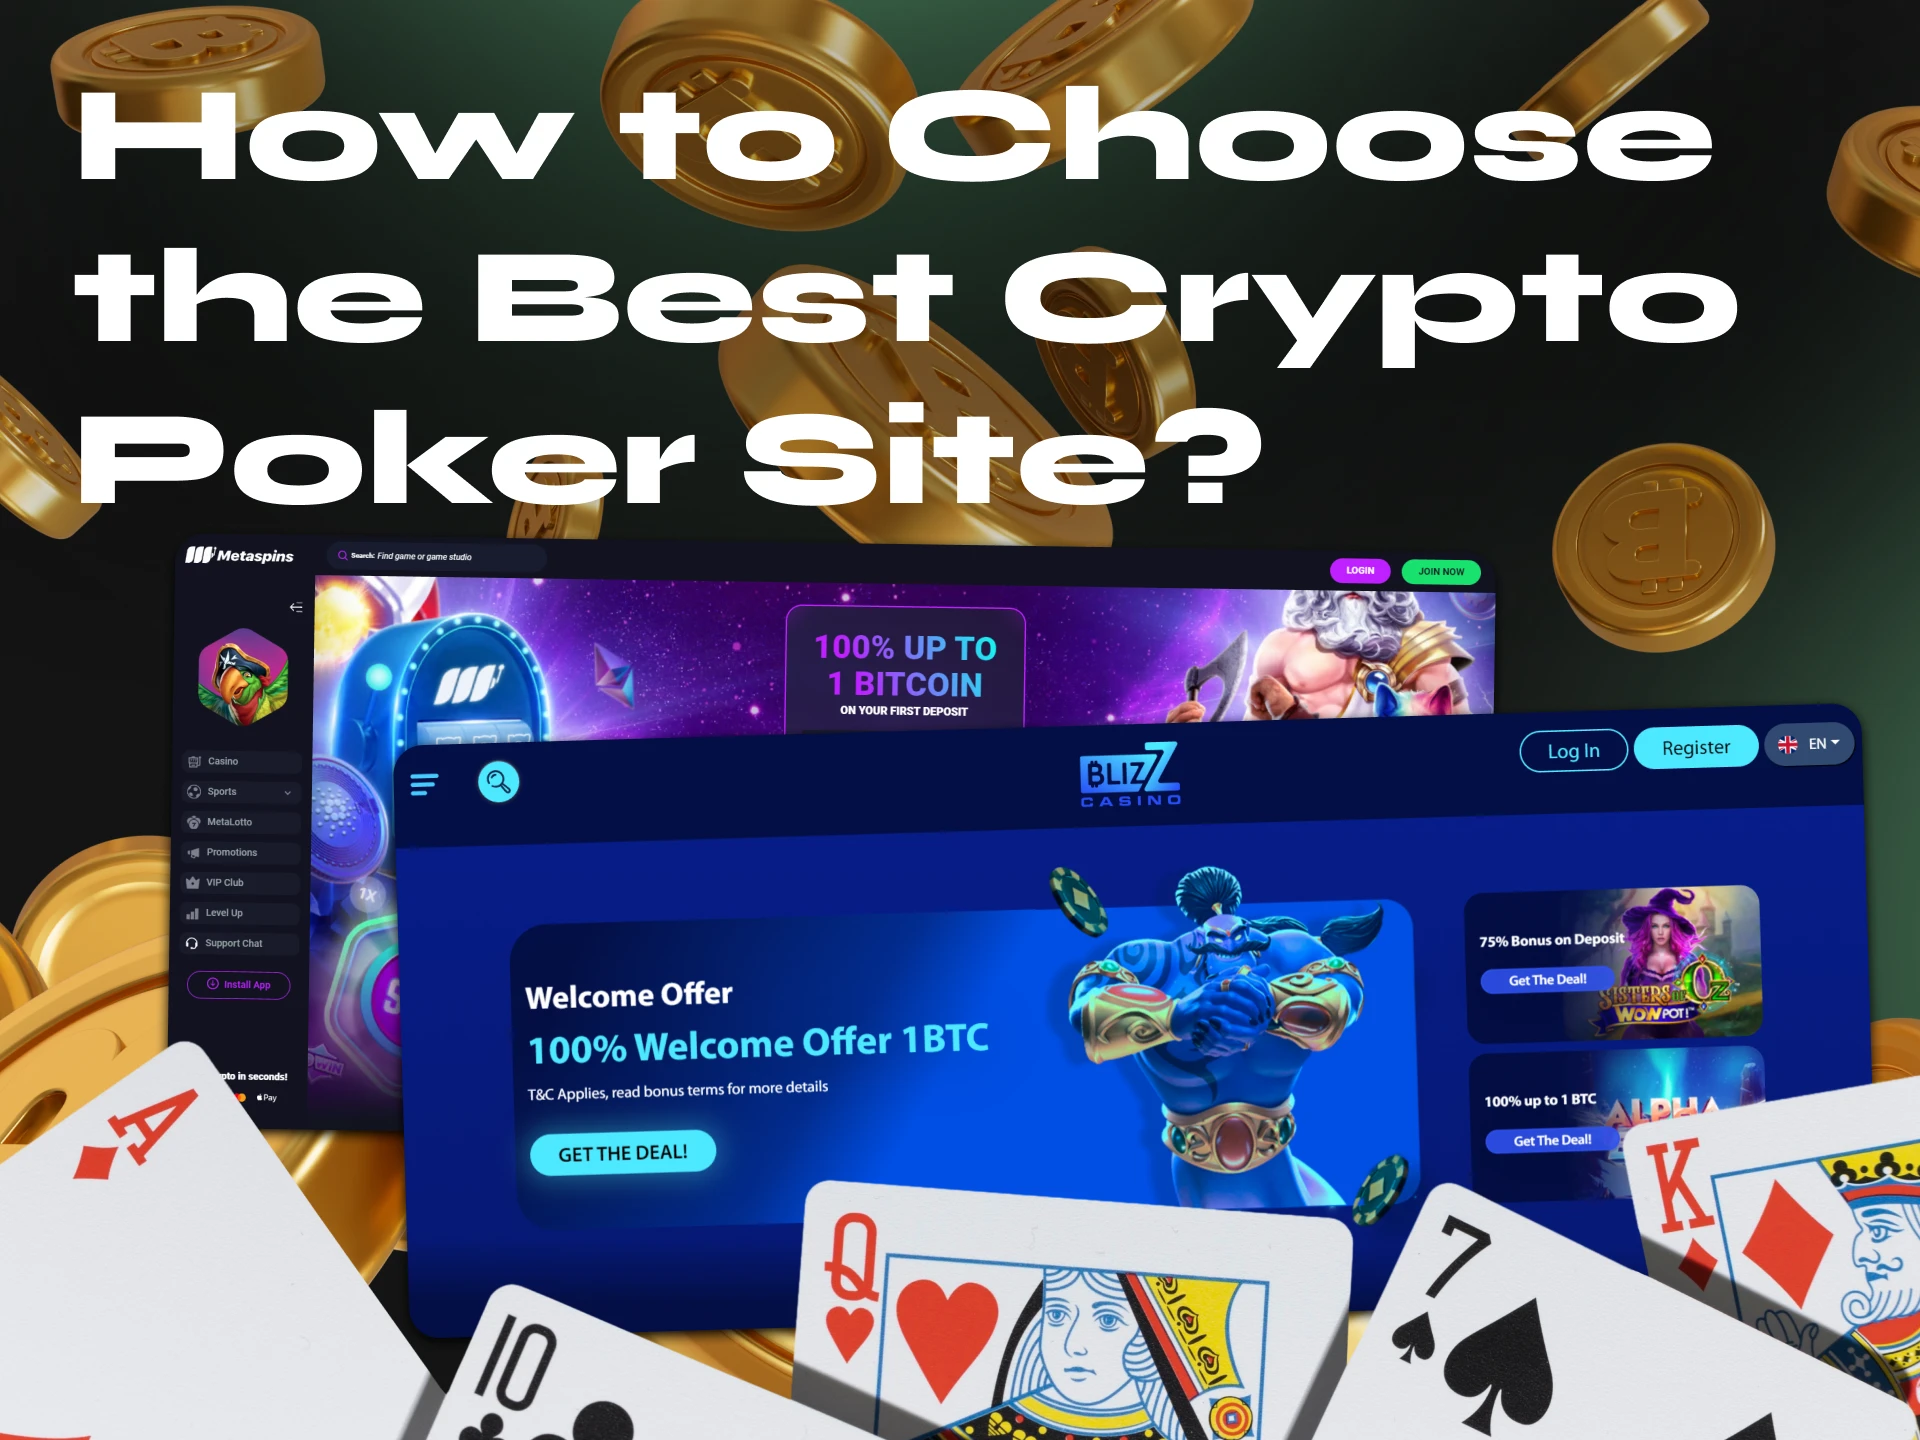 Here is a guide on how to choose the best crypto poker casino.